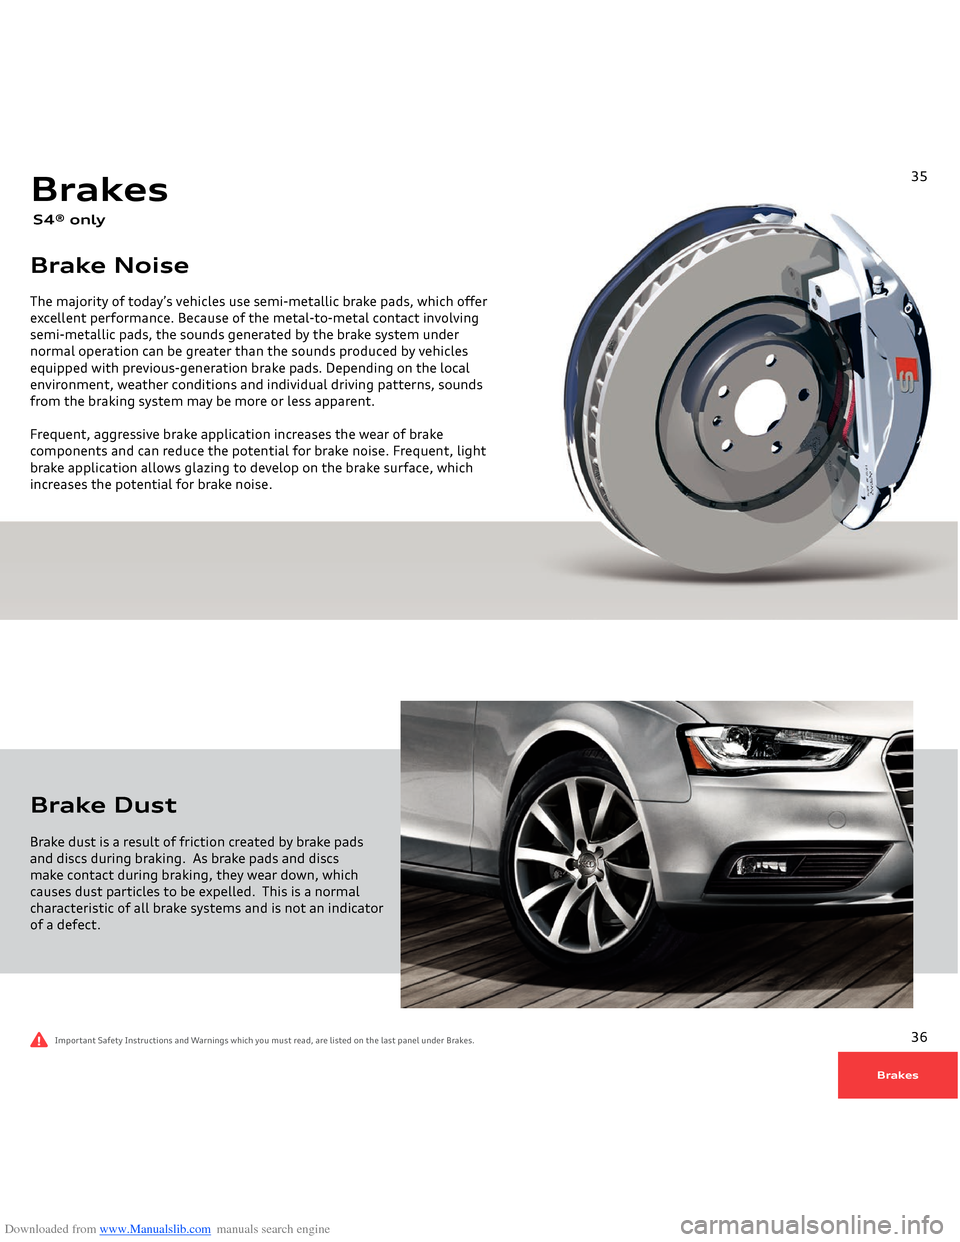 AUDI A4 2014 B8 / 4.G Getting To Know Downloaded from www.Manualslib.com manuals search engine Brake Noise
 
Brakes S4® onlyThe majority of today’s vehicles use semi-metallic brake pads, which offer excellent performance. Because of th